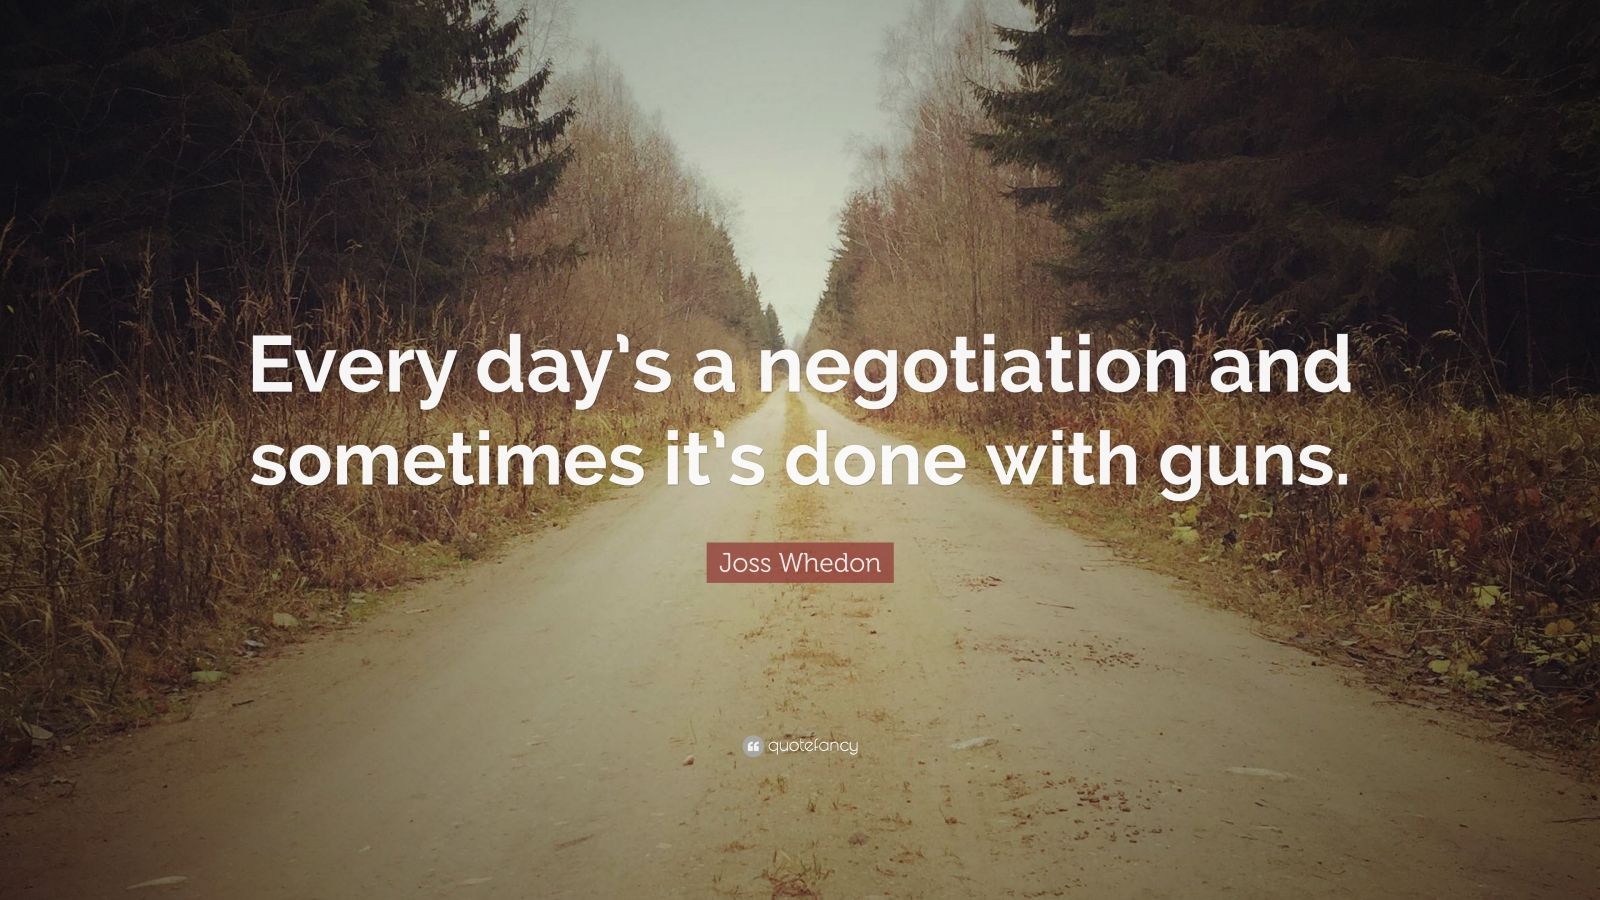 Joss Whedon Quote: “Every day’s a negotiation and sometimes it’s done ...